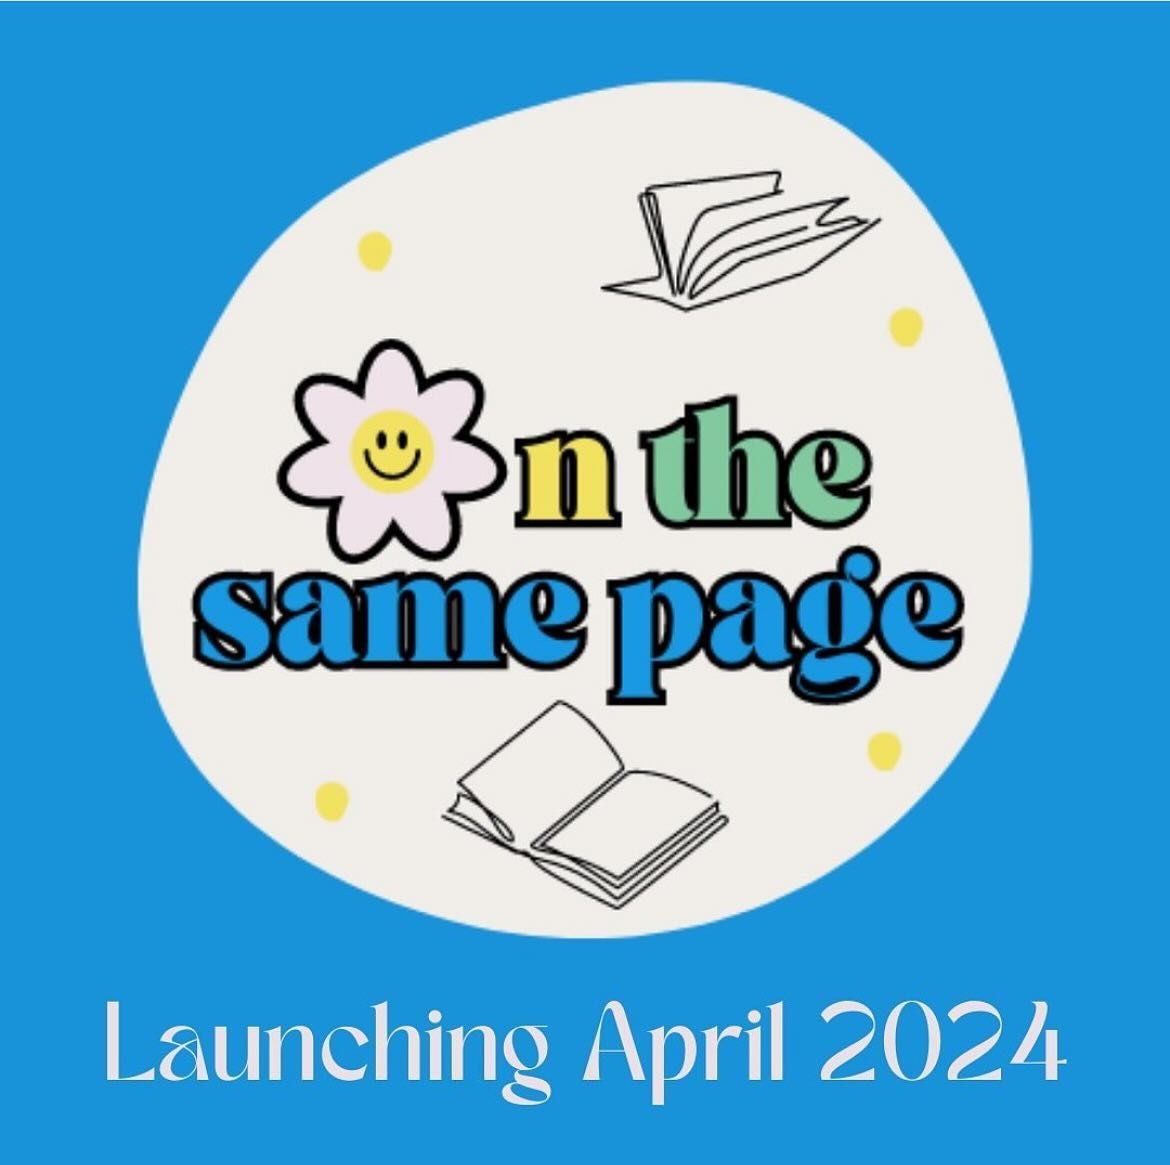 Let&rsquo;s get on the same page 📚

We are excited to announce a new monthly book club will coming to us here at One Bruce Street starting April 25th!

On the same page, created by Kelly and Shereen, is for all you book lovers to come together to sh